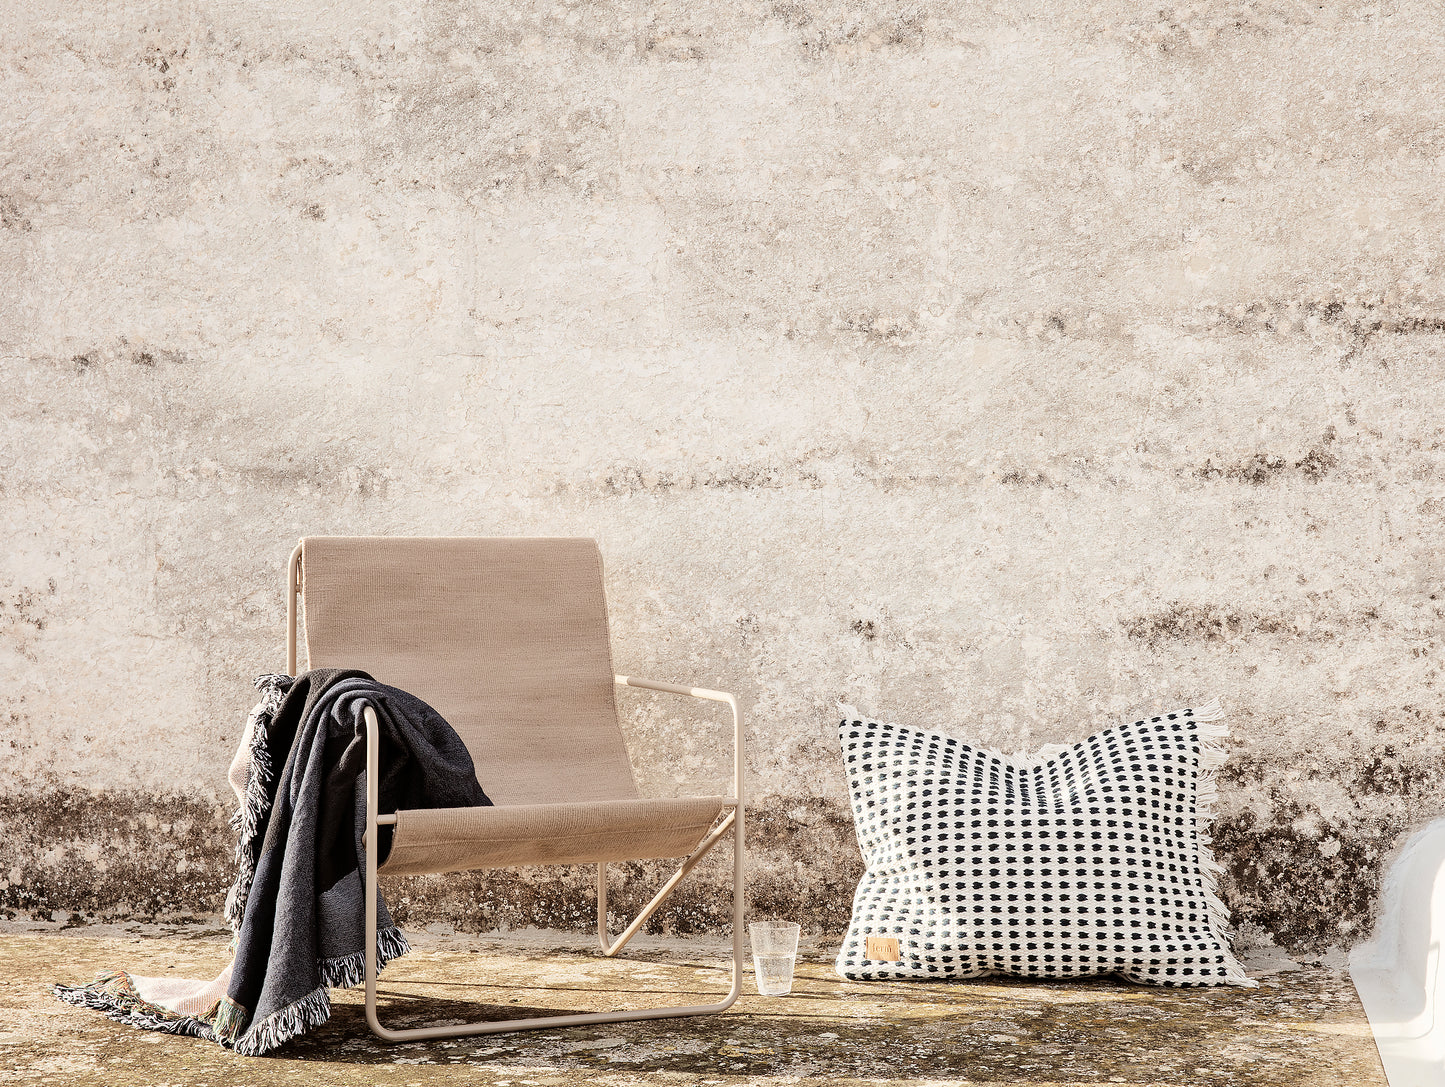 Desert Chair Sand with Cashmere Frame by Ferm Living